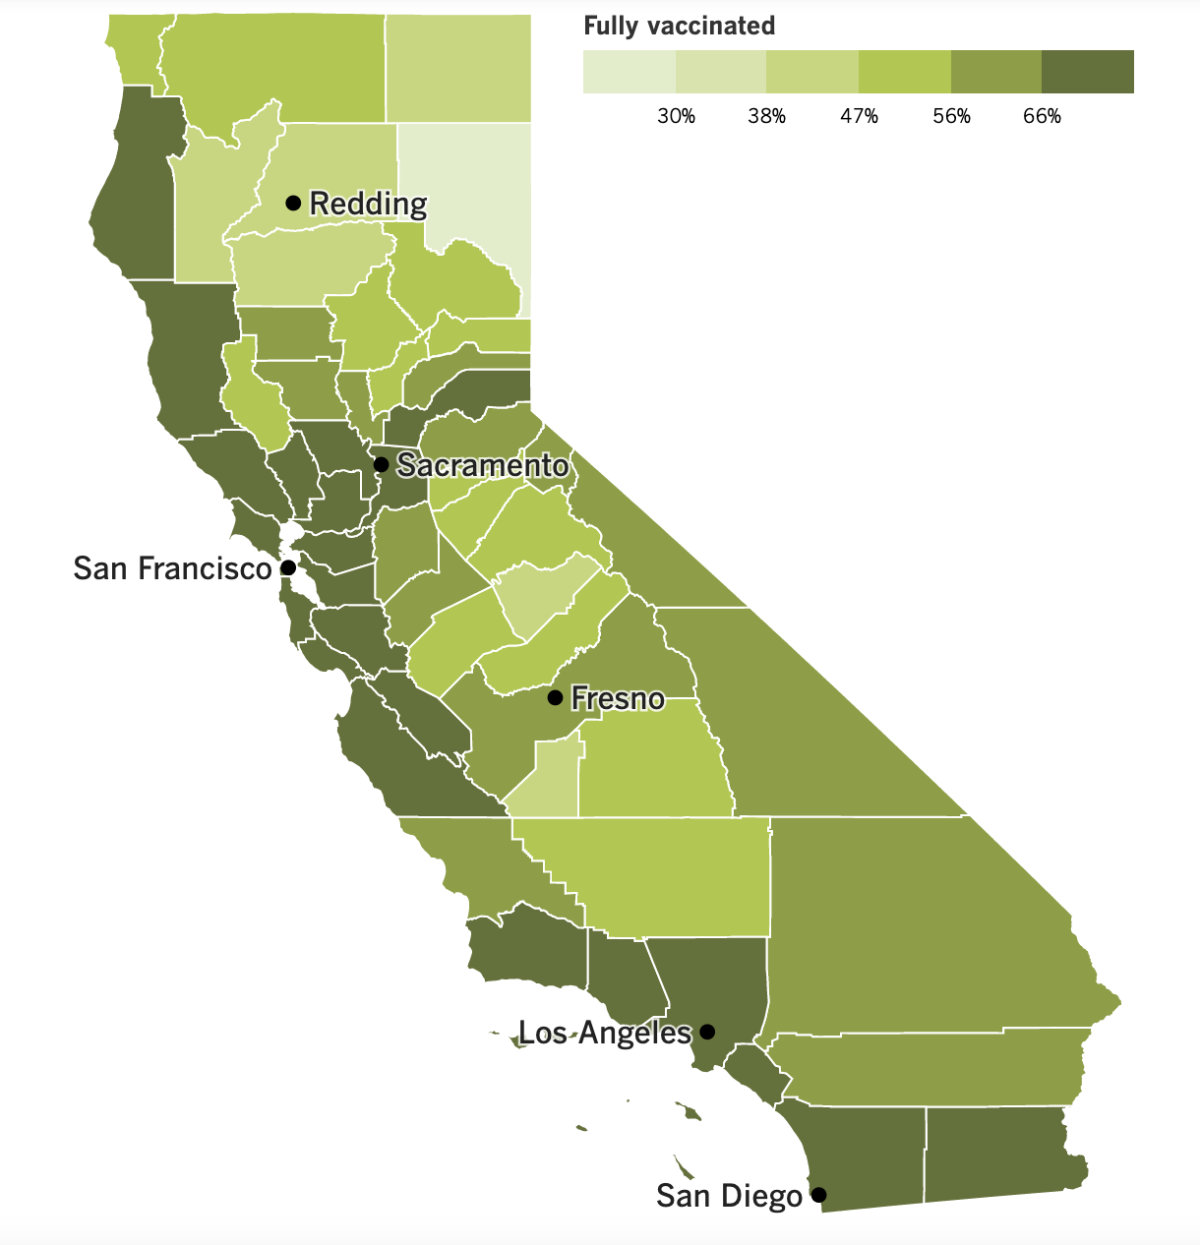 A map showing California's COVID-19 vaccination progress by county, as of May 3, 2022.